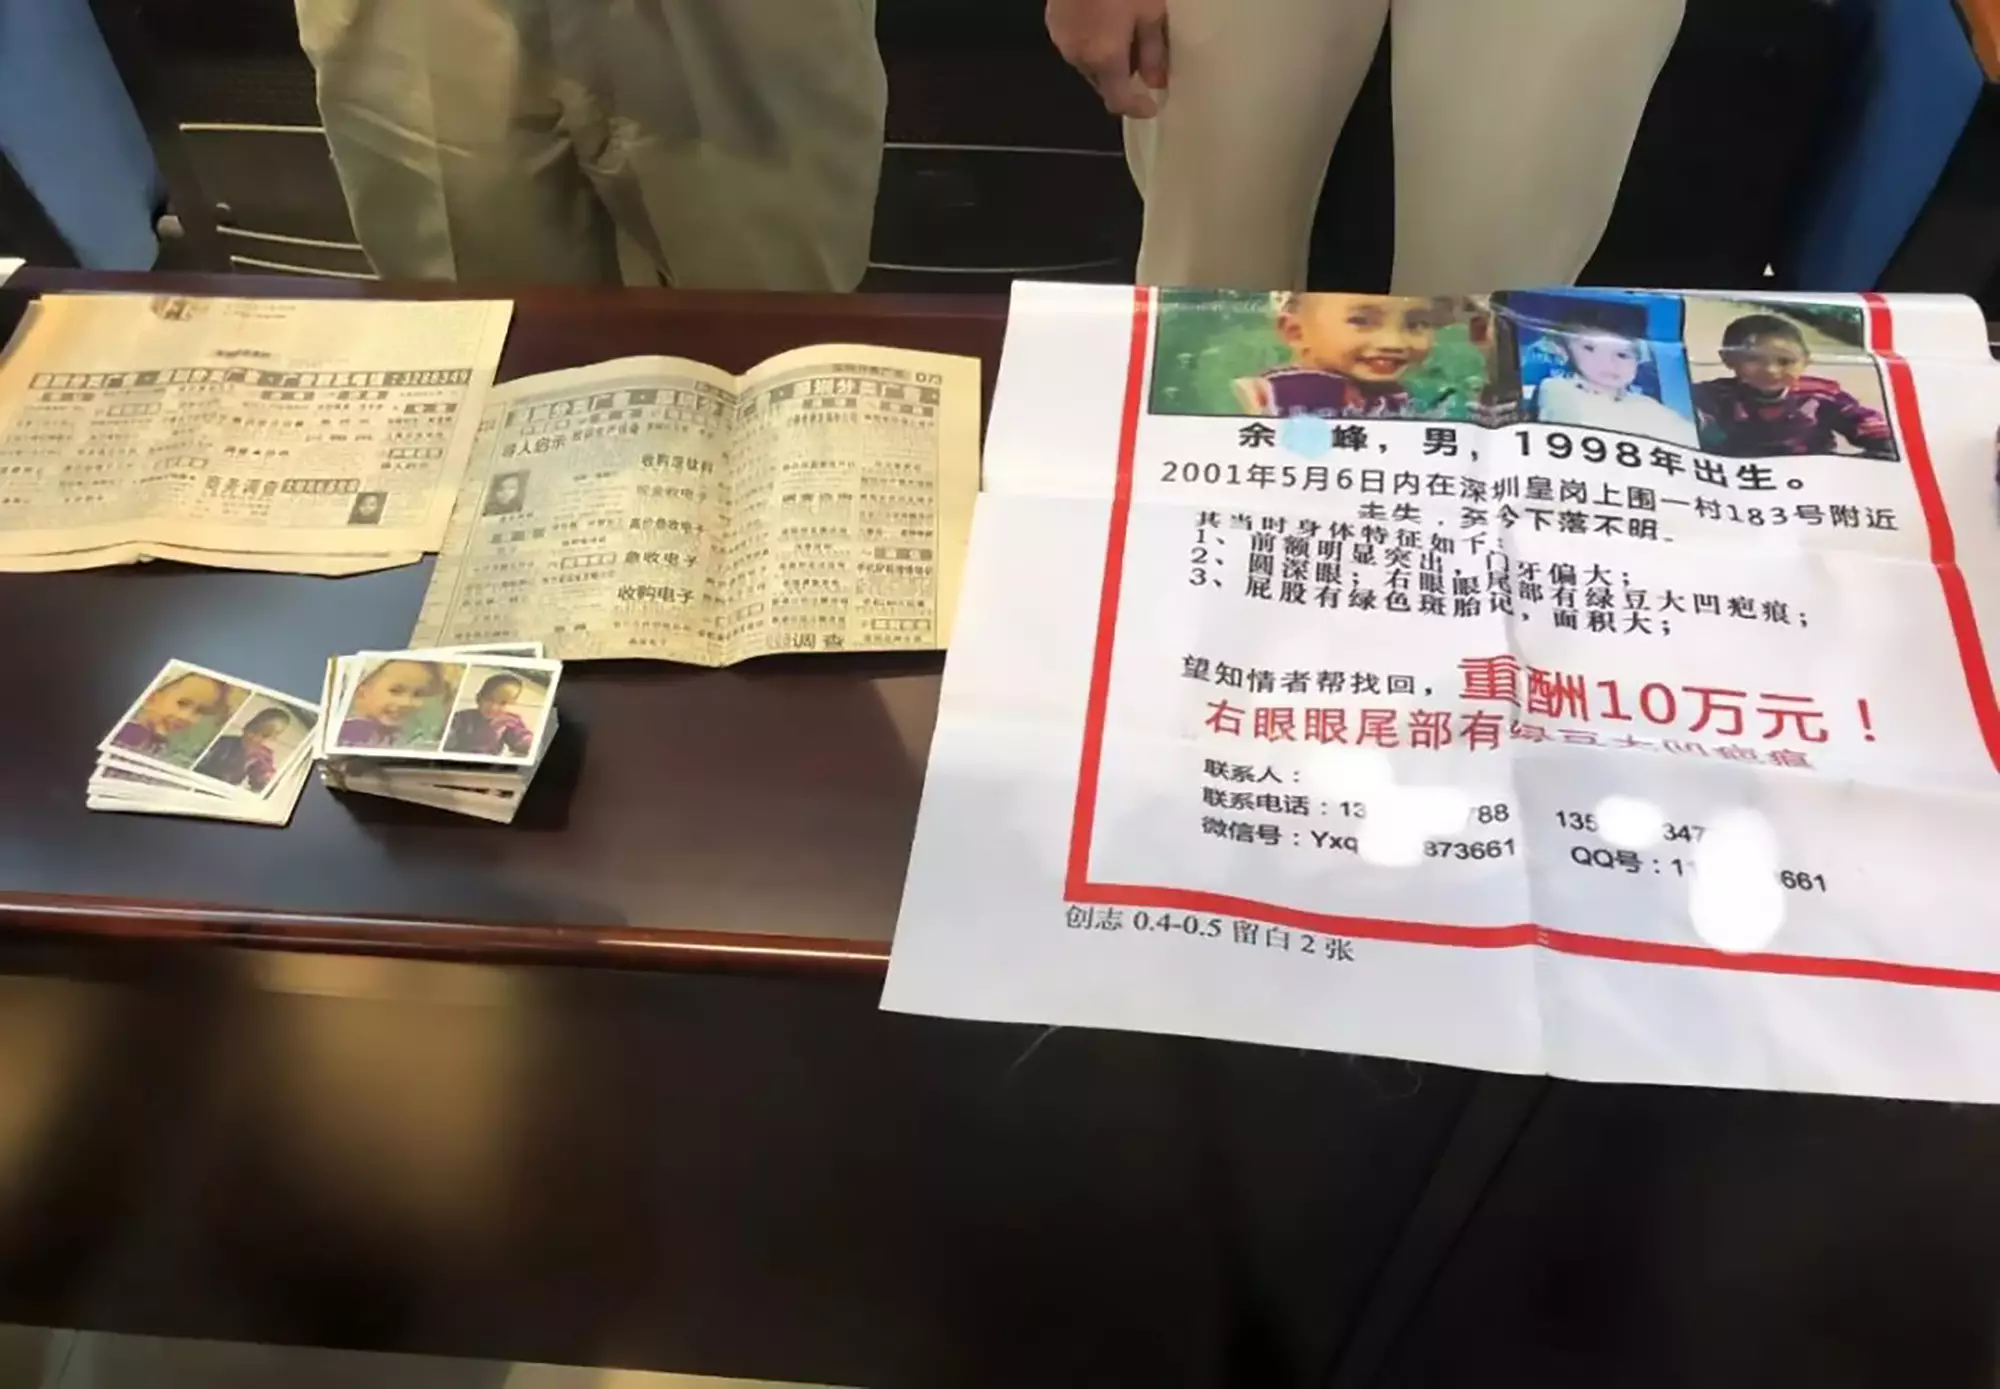 Mr and Ms Yu offered £11,600 for information about their missing son.